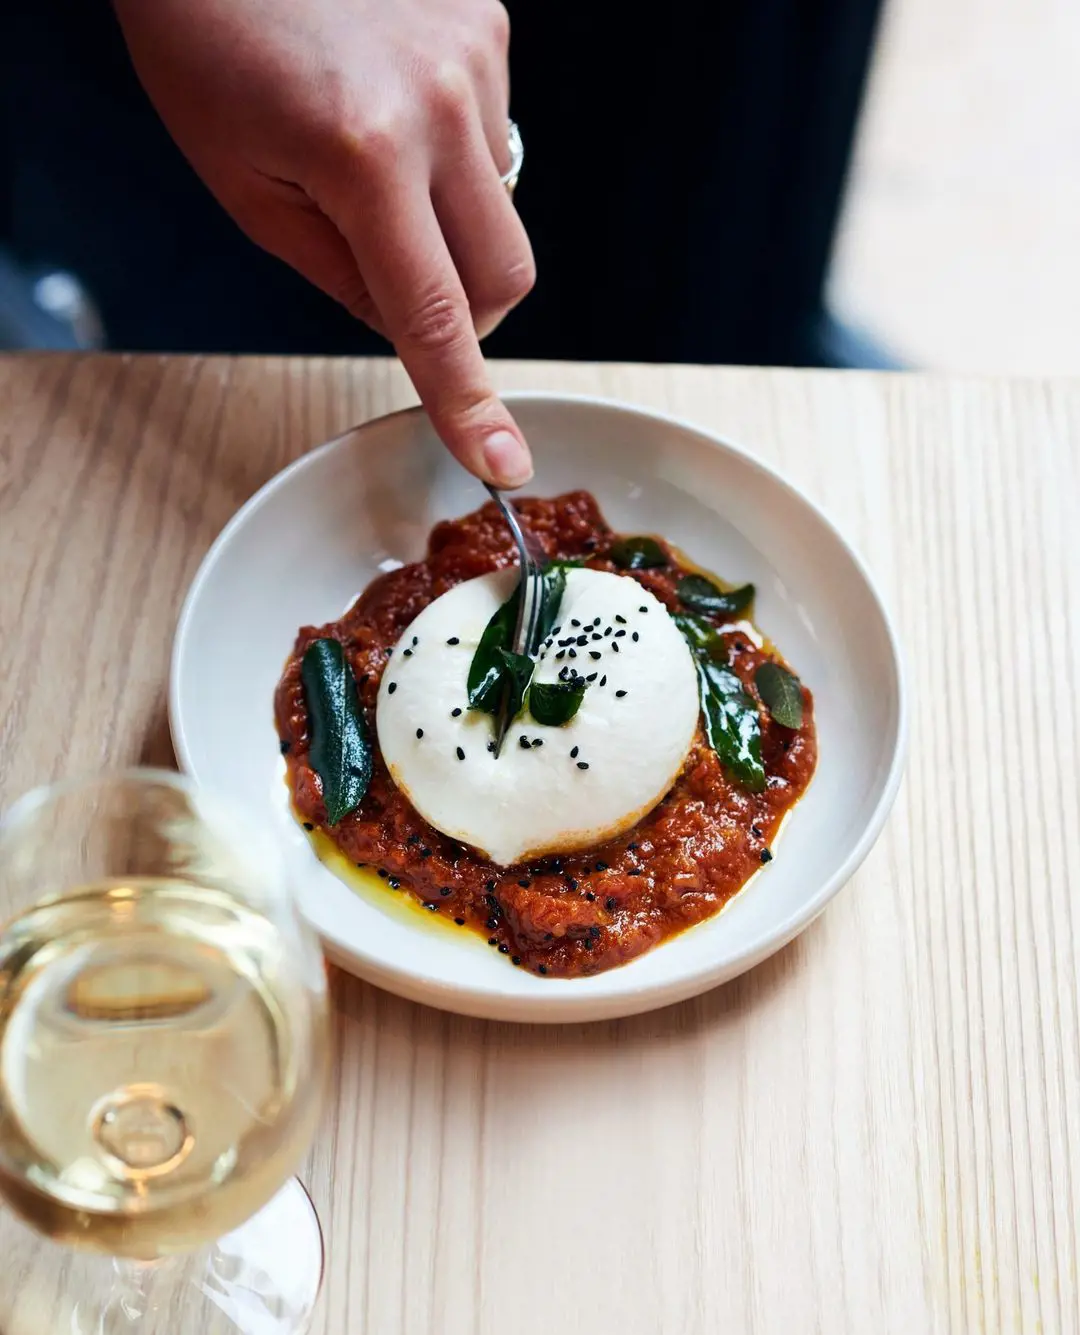 Burrata, spiced tomato and ginger relish, nigella, curry leaves⁠